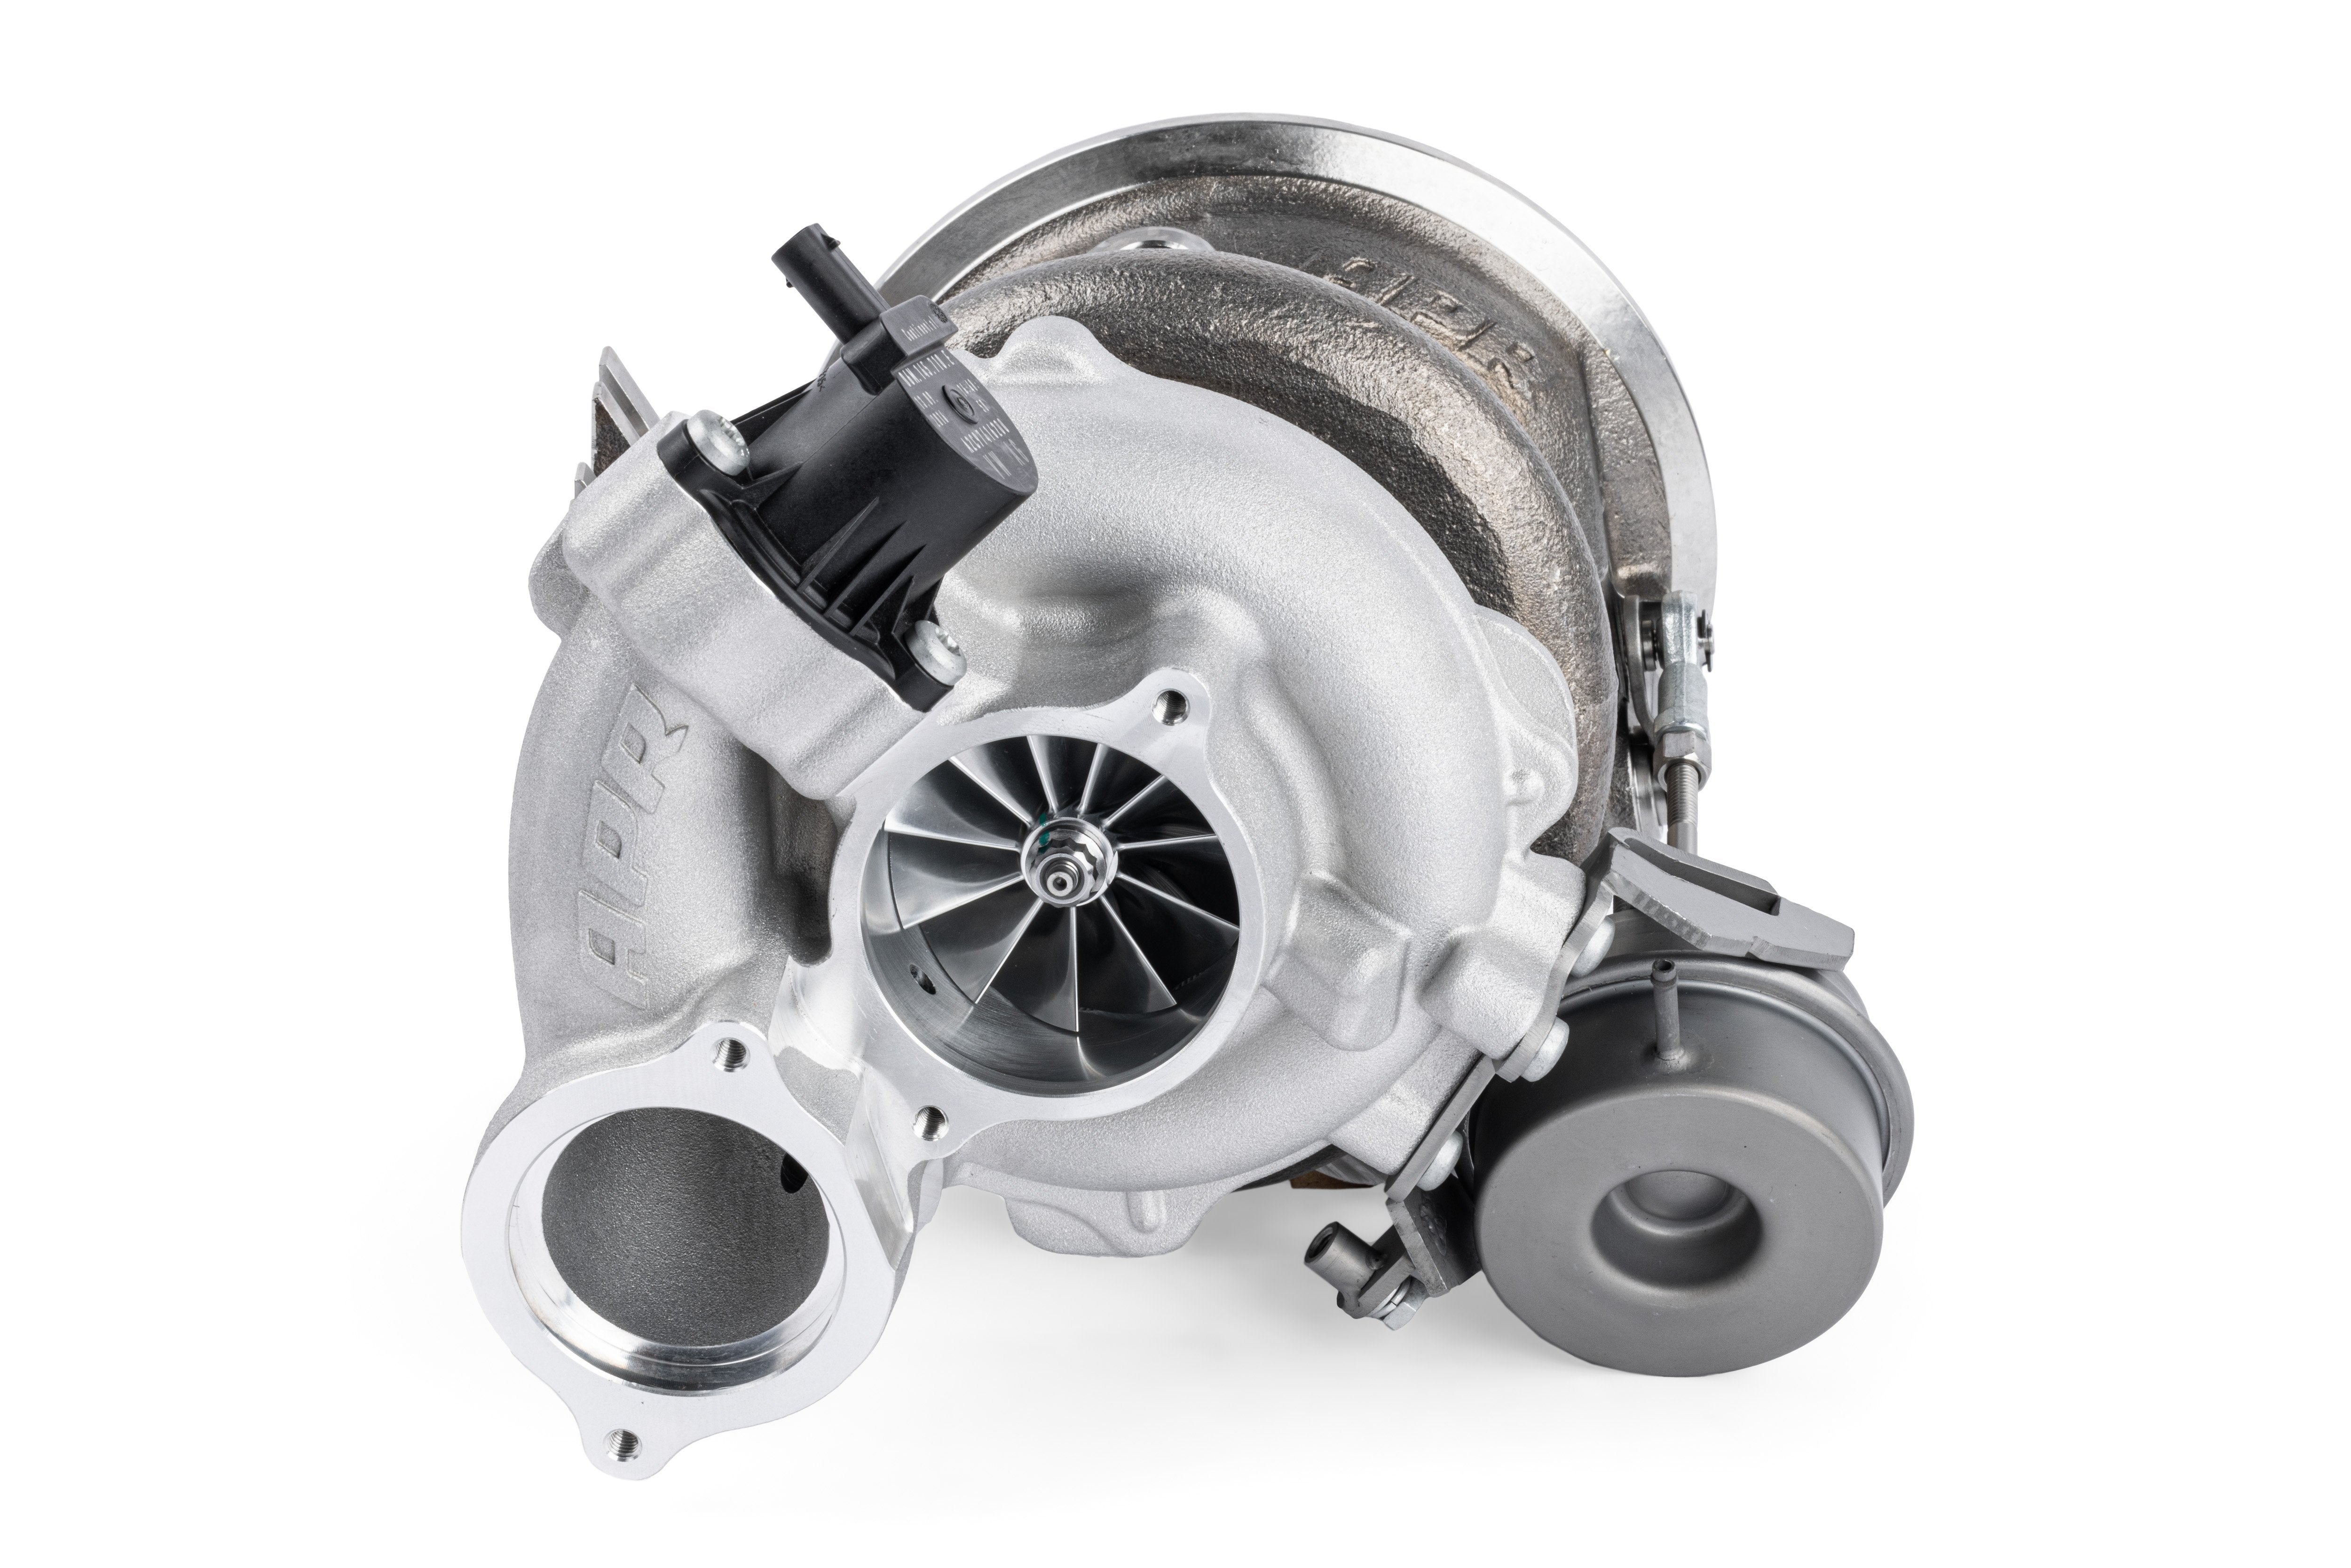 APR DTR8868 Direct Replacement Turbo Charger System - Audi B9 S4/S5 and SQ5 3.0T EA839